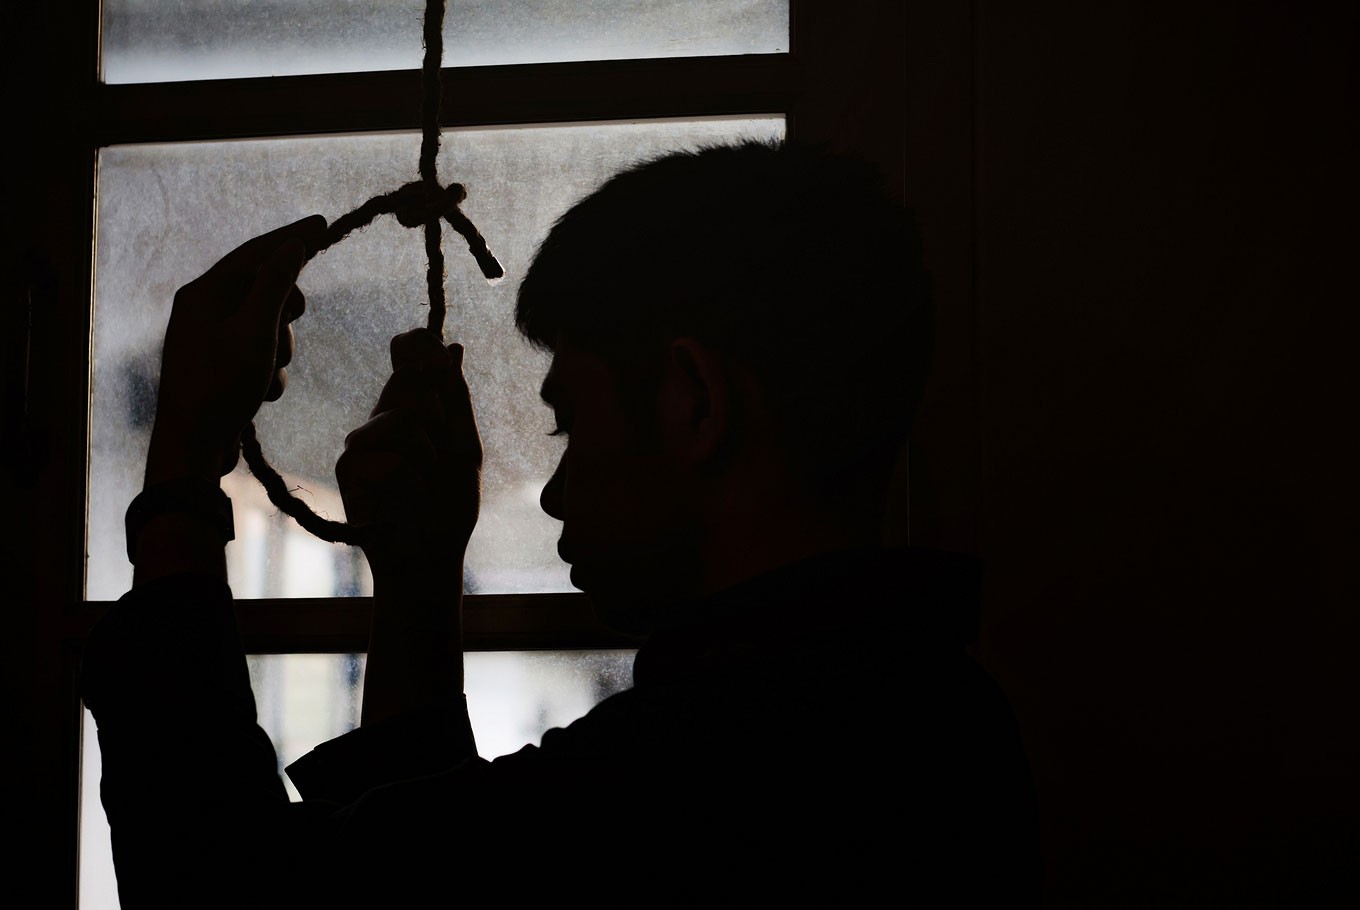 File photo of a man’s silhouette and a rope by the window. Photo: Freedom Studio
